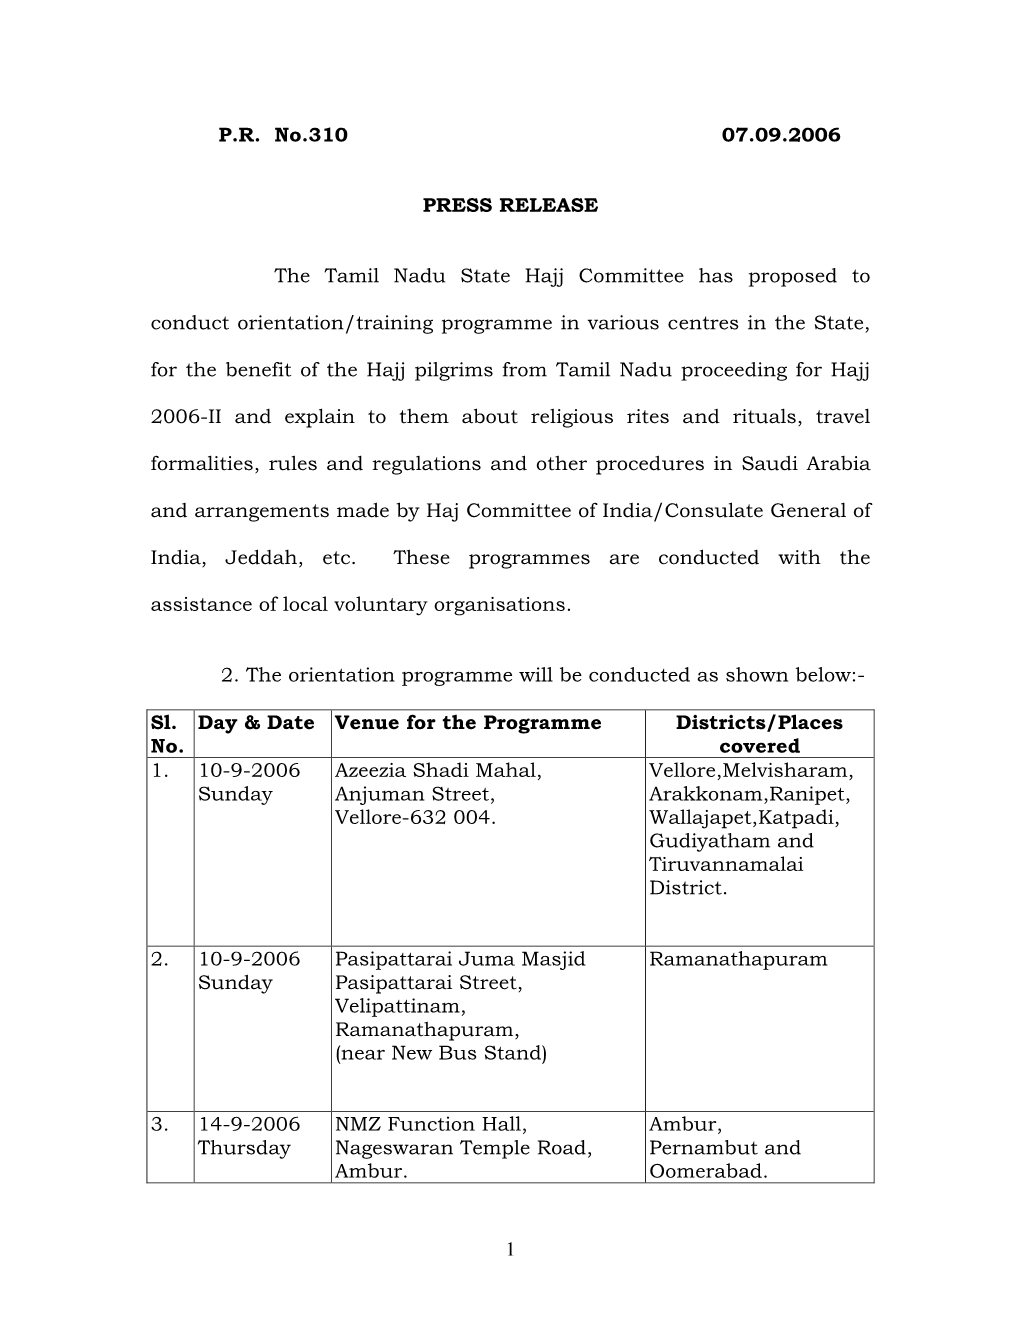 1 P.R. No.310 07.09.2006 PRESS RELEASE the Tamil Nadu State Hajj Committee Has Proposed to Conduct Orientation/Training